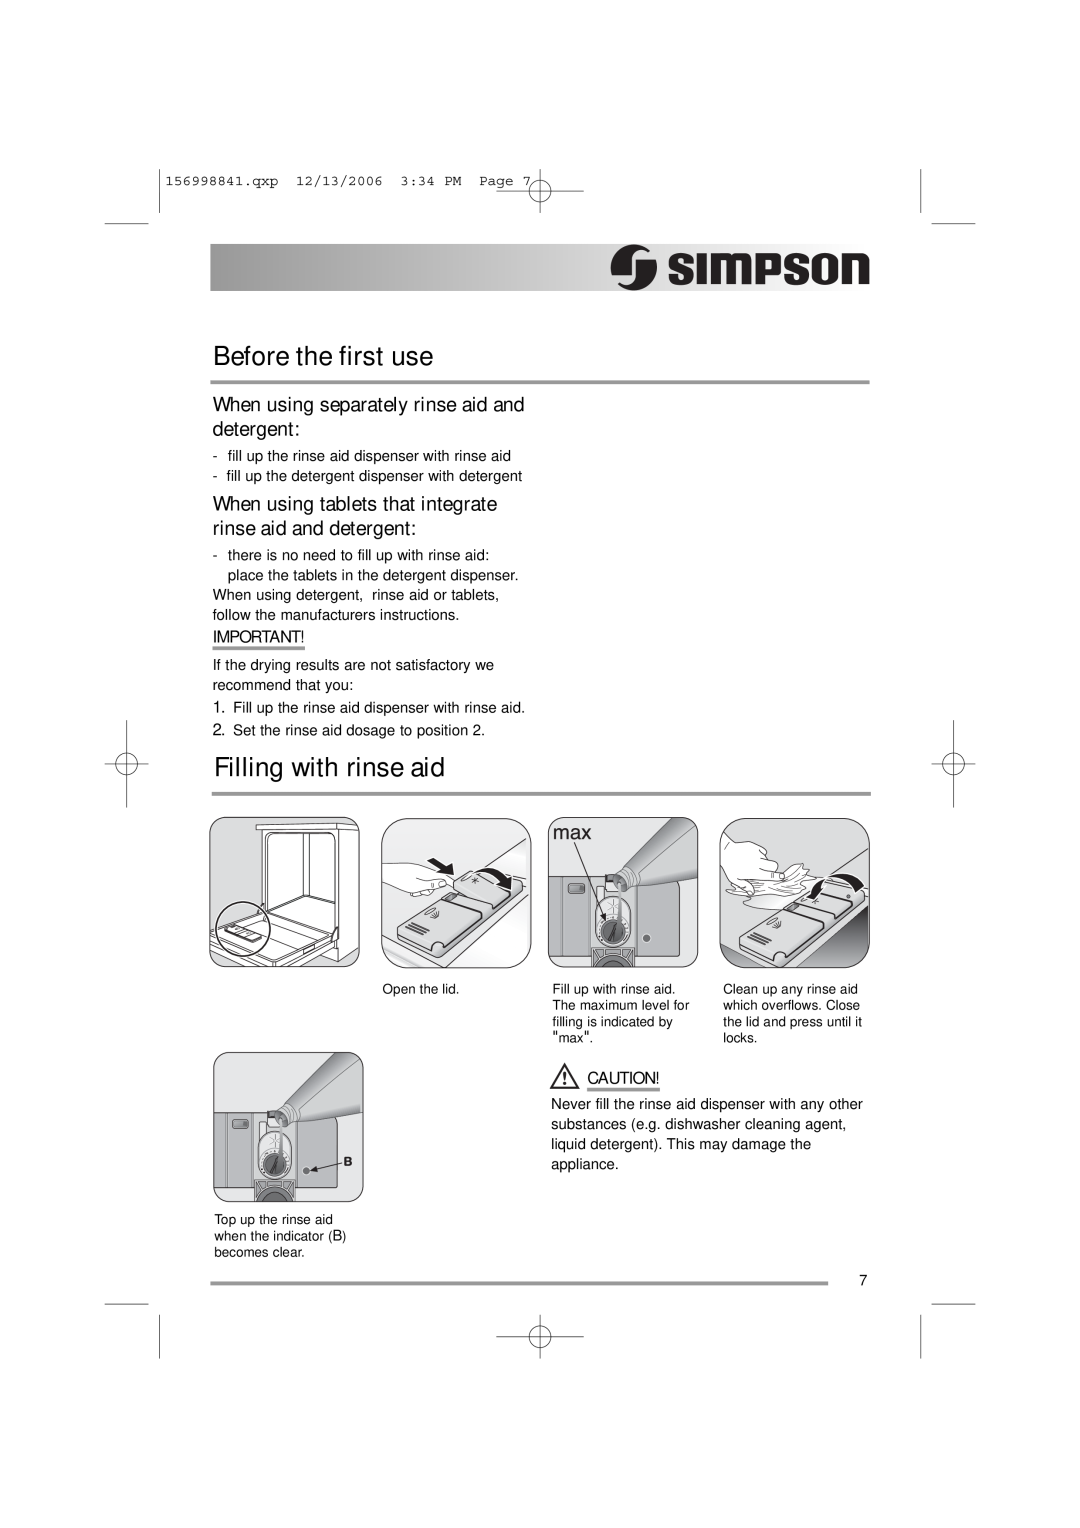 Simpson 52C850 user manual Before the first use, Filling with rinse aid, When using separately rinse aid and detergent 